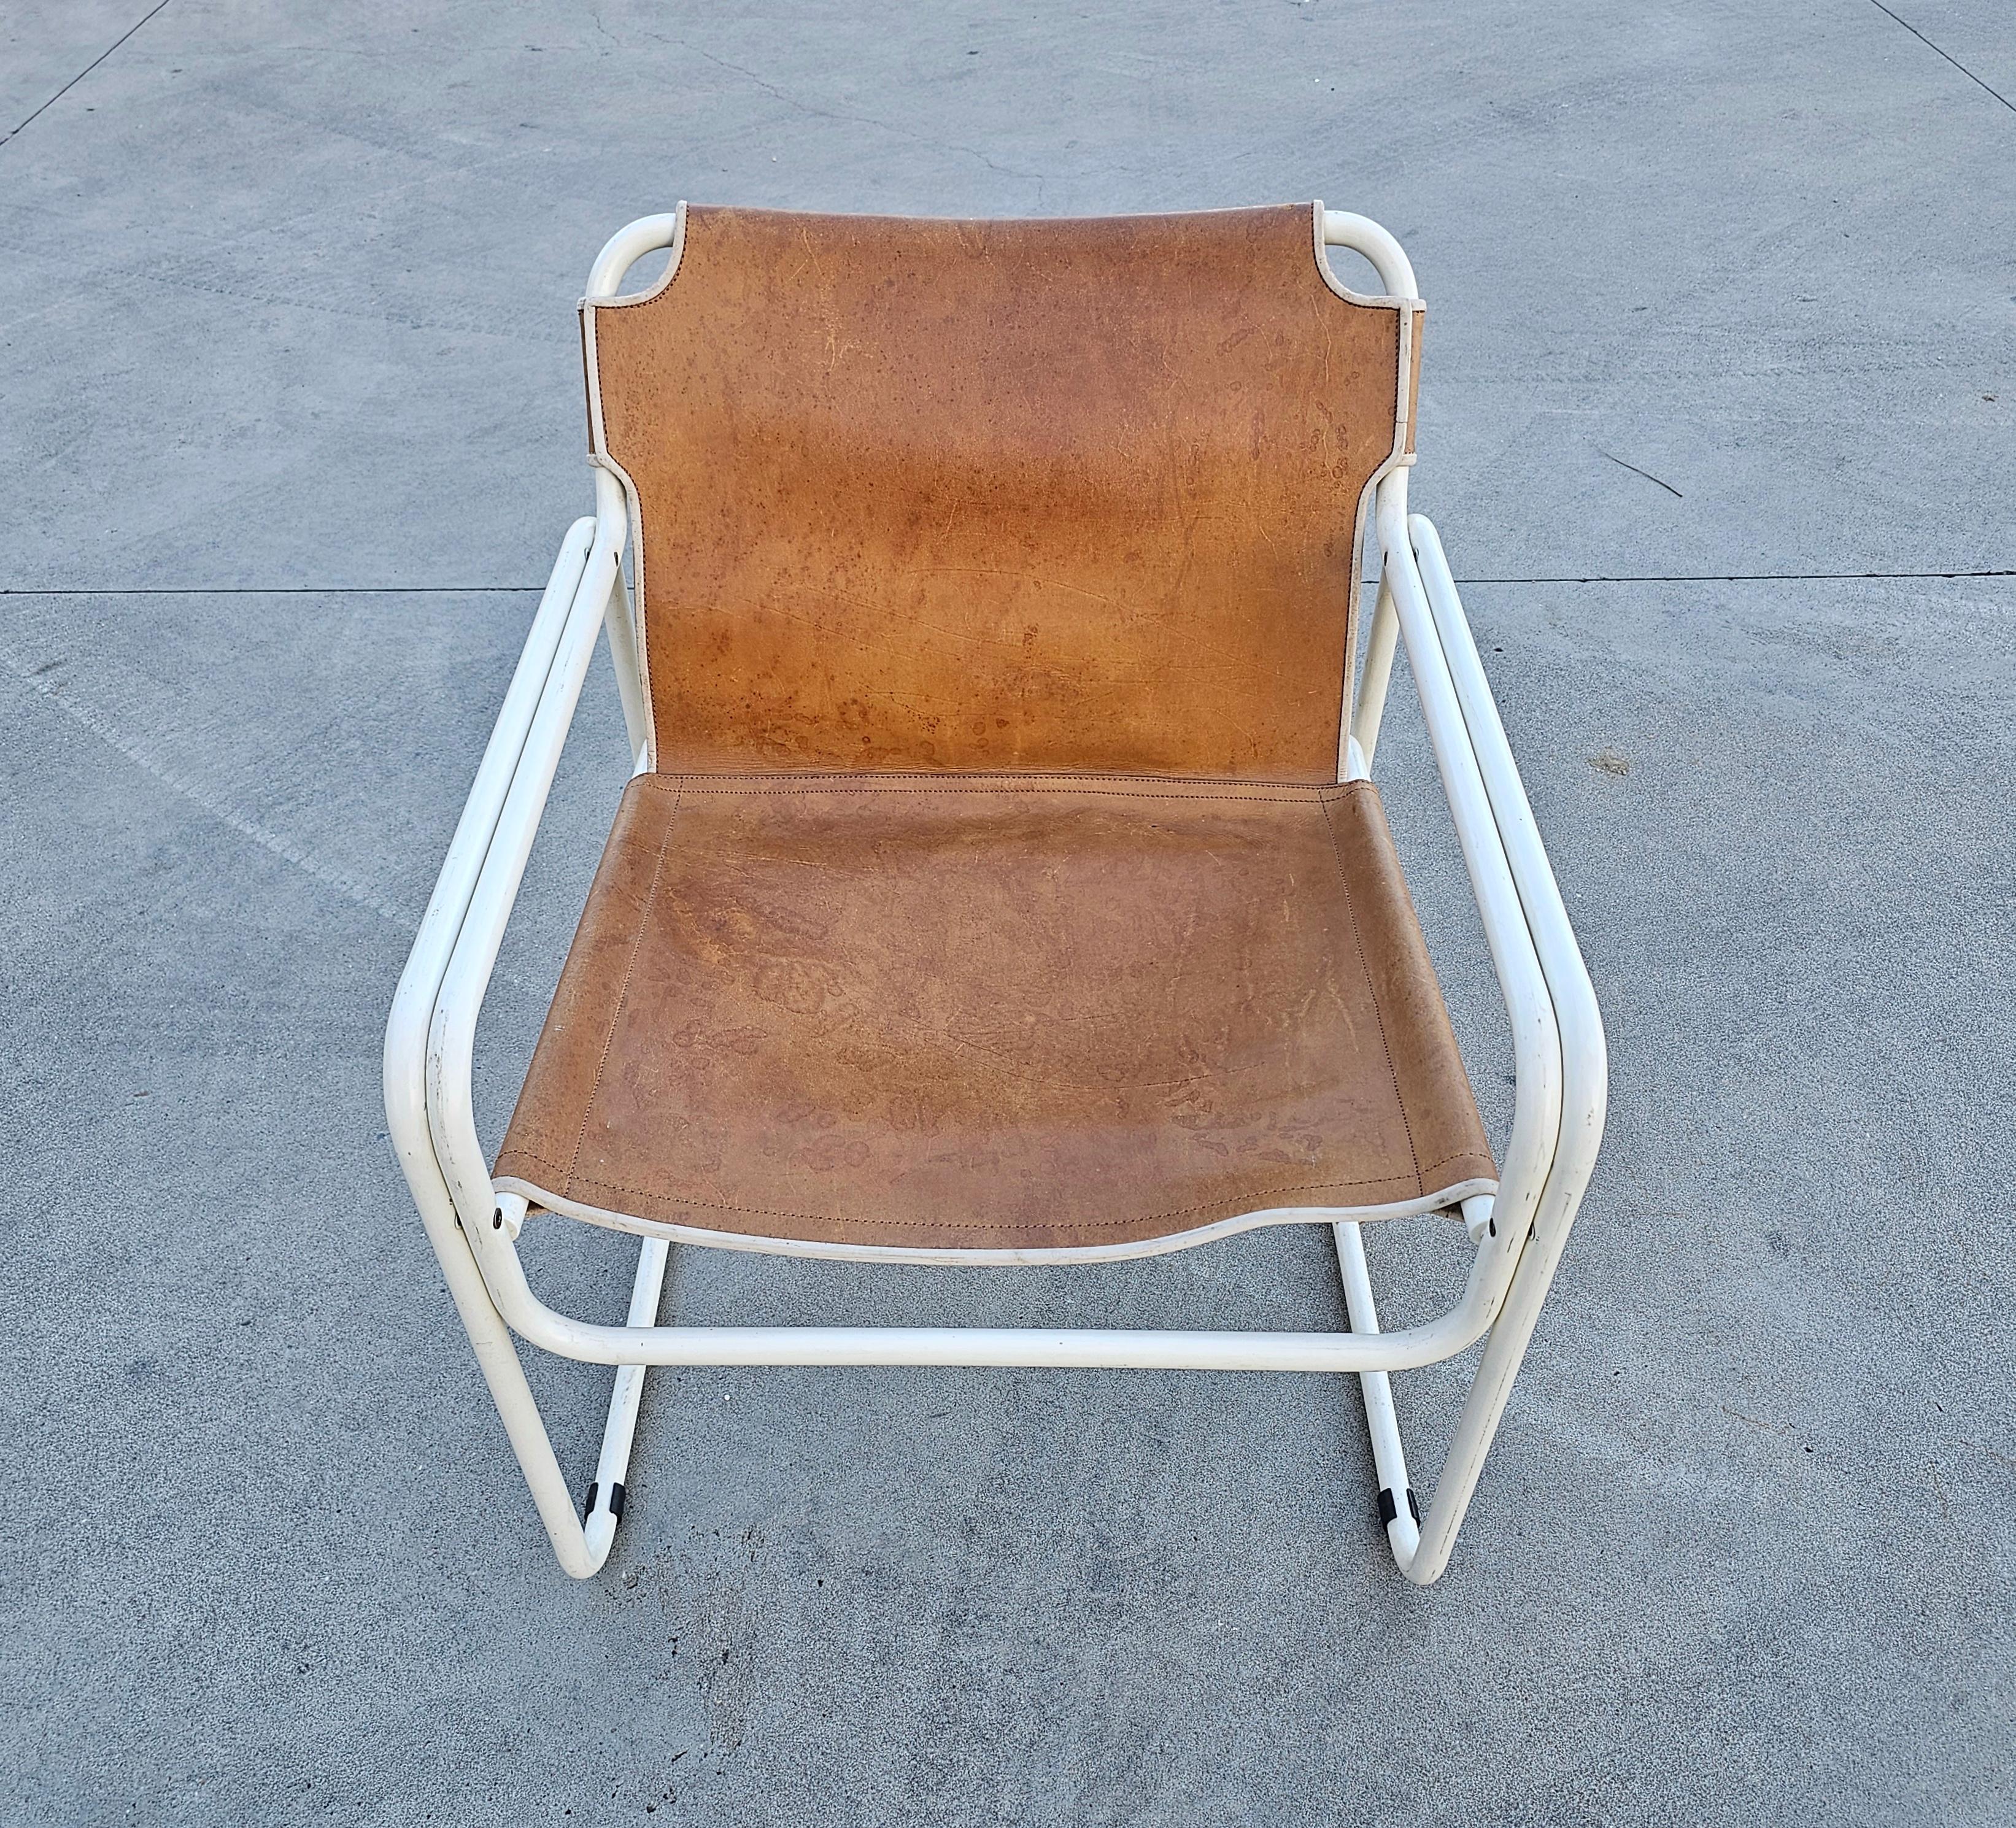 Steel Bauhaus Style Tubular Easy Chairs in Cognac Leather by Jox Interni, 1970s For Sale